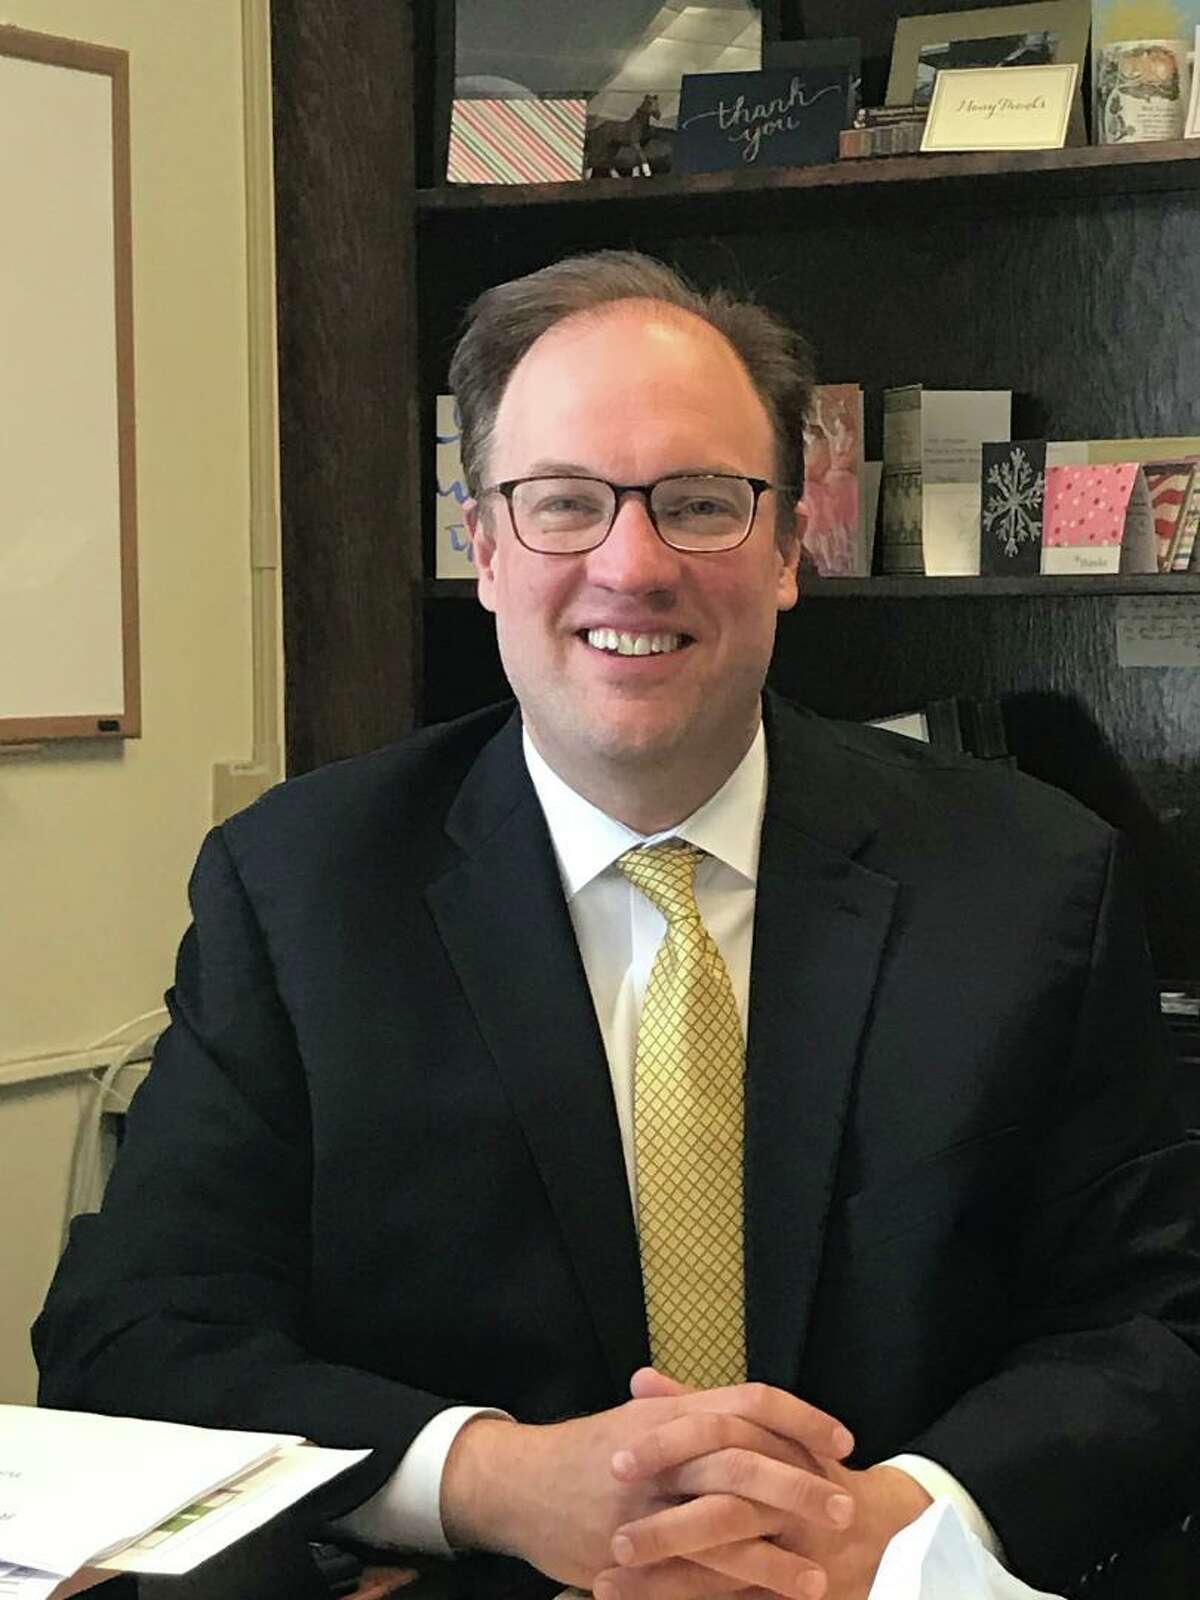 Woodbridge School District’s superintendent Jonathan Budd is joining Greenwich Public Schools’ administration as chief human resources officer beginning July 1, 2022.